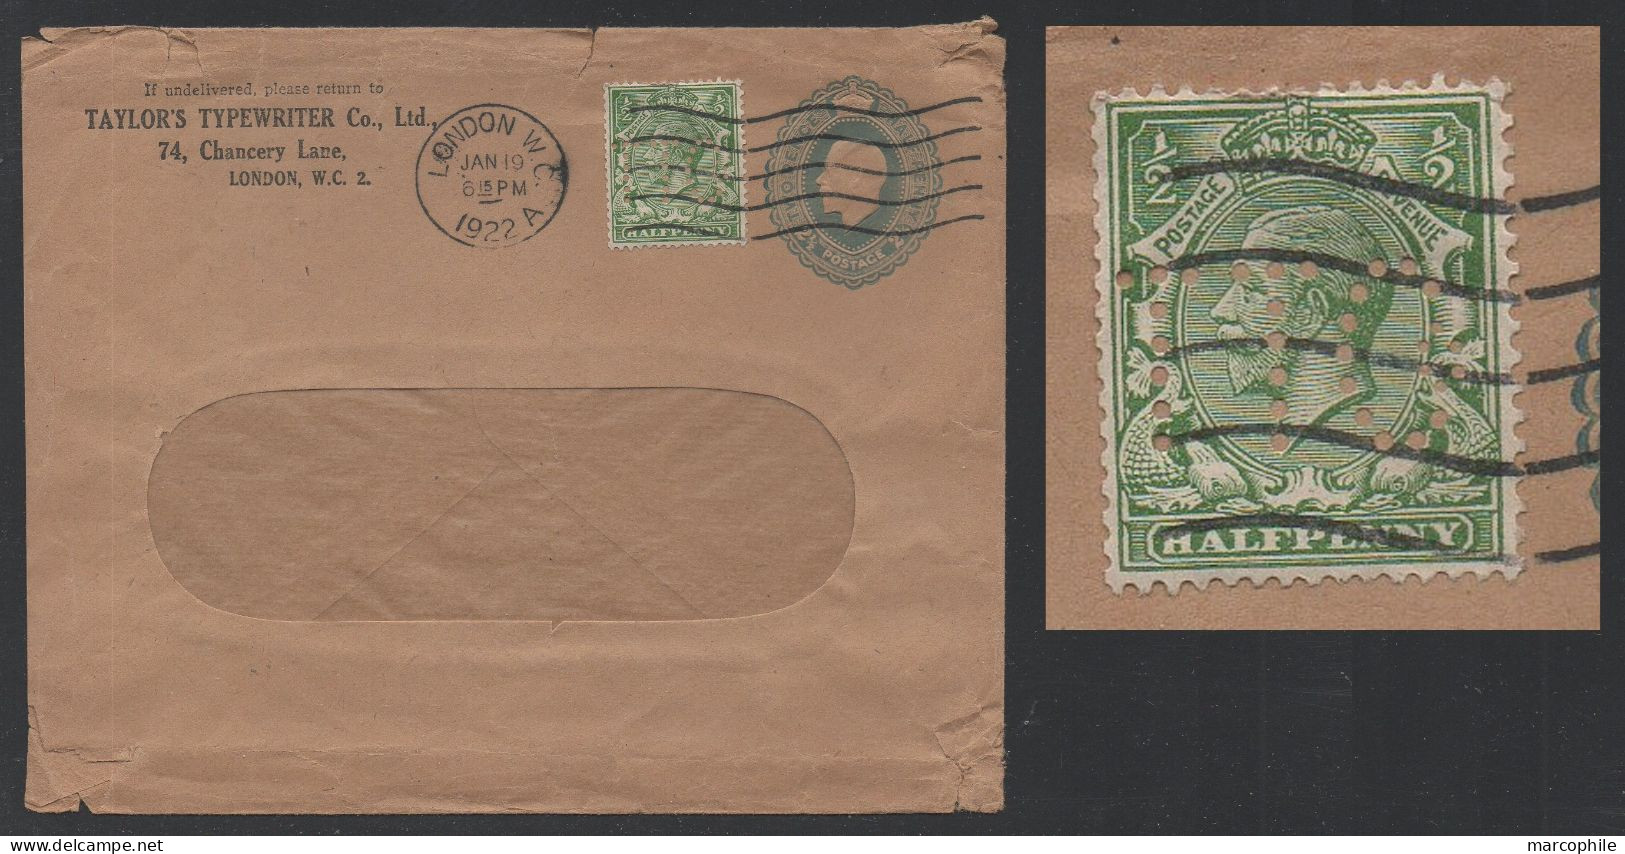 GB / 192 PERFIN "TTCo" (TAYLOR'S TYPEWRITER Co) WAX SEAL ON PRIVATE POSTAL STATIONERY ENVELOPE (ref 9012) - Perforadas